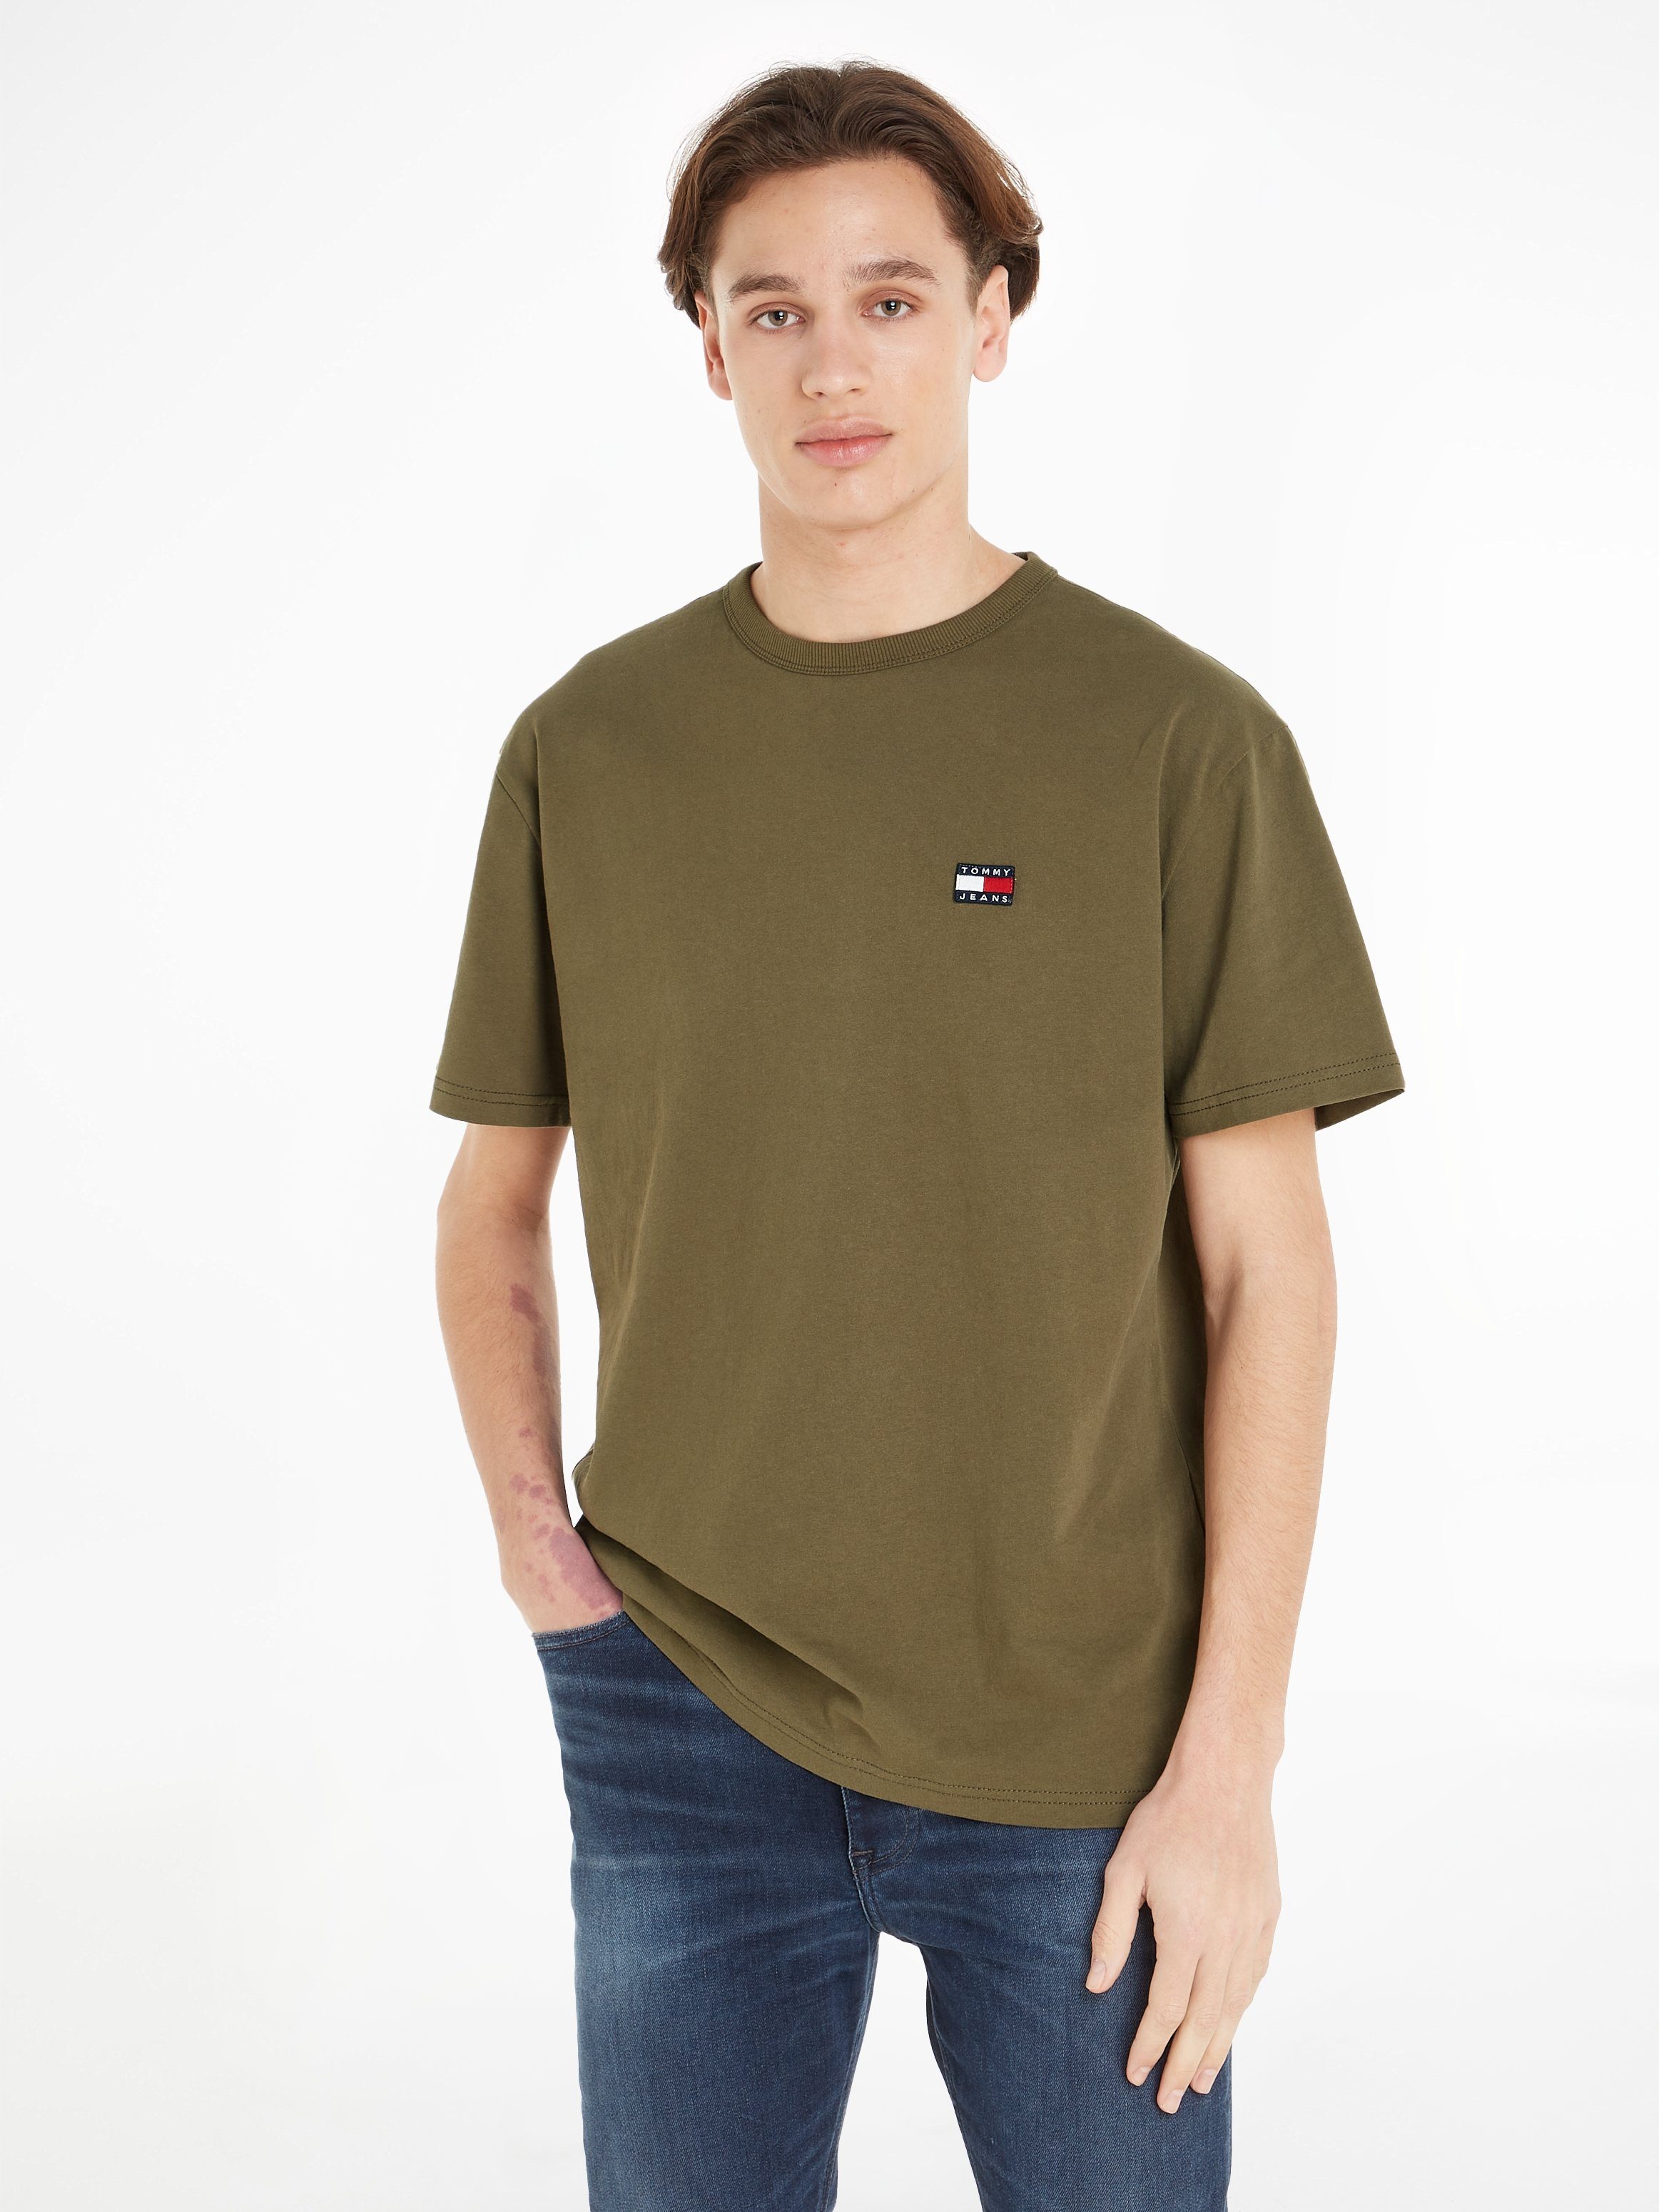 CLSC TJM Tommy XS TEE Green TOMMY Drab BADGE Jeans T-Shirt Olive